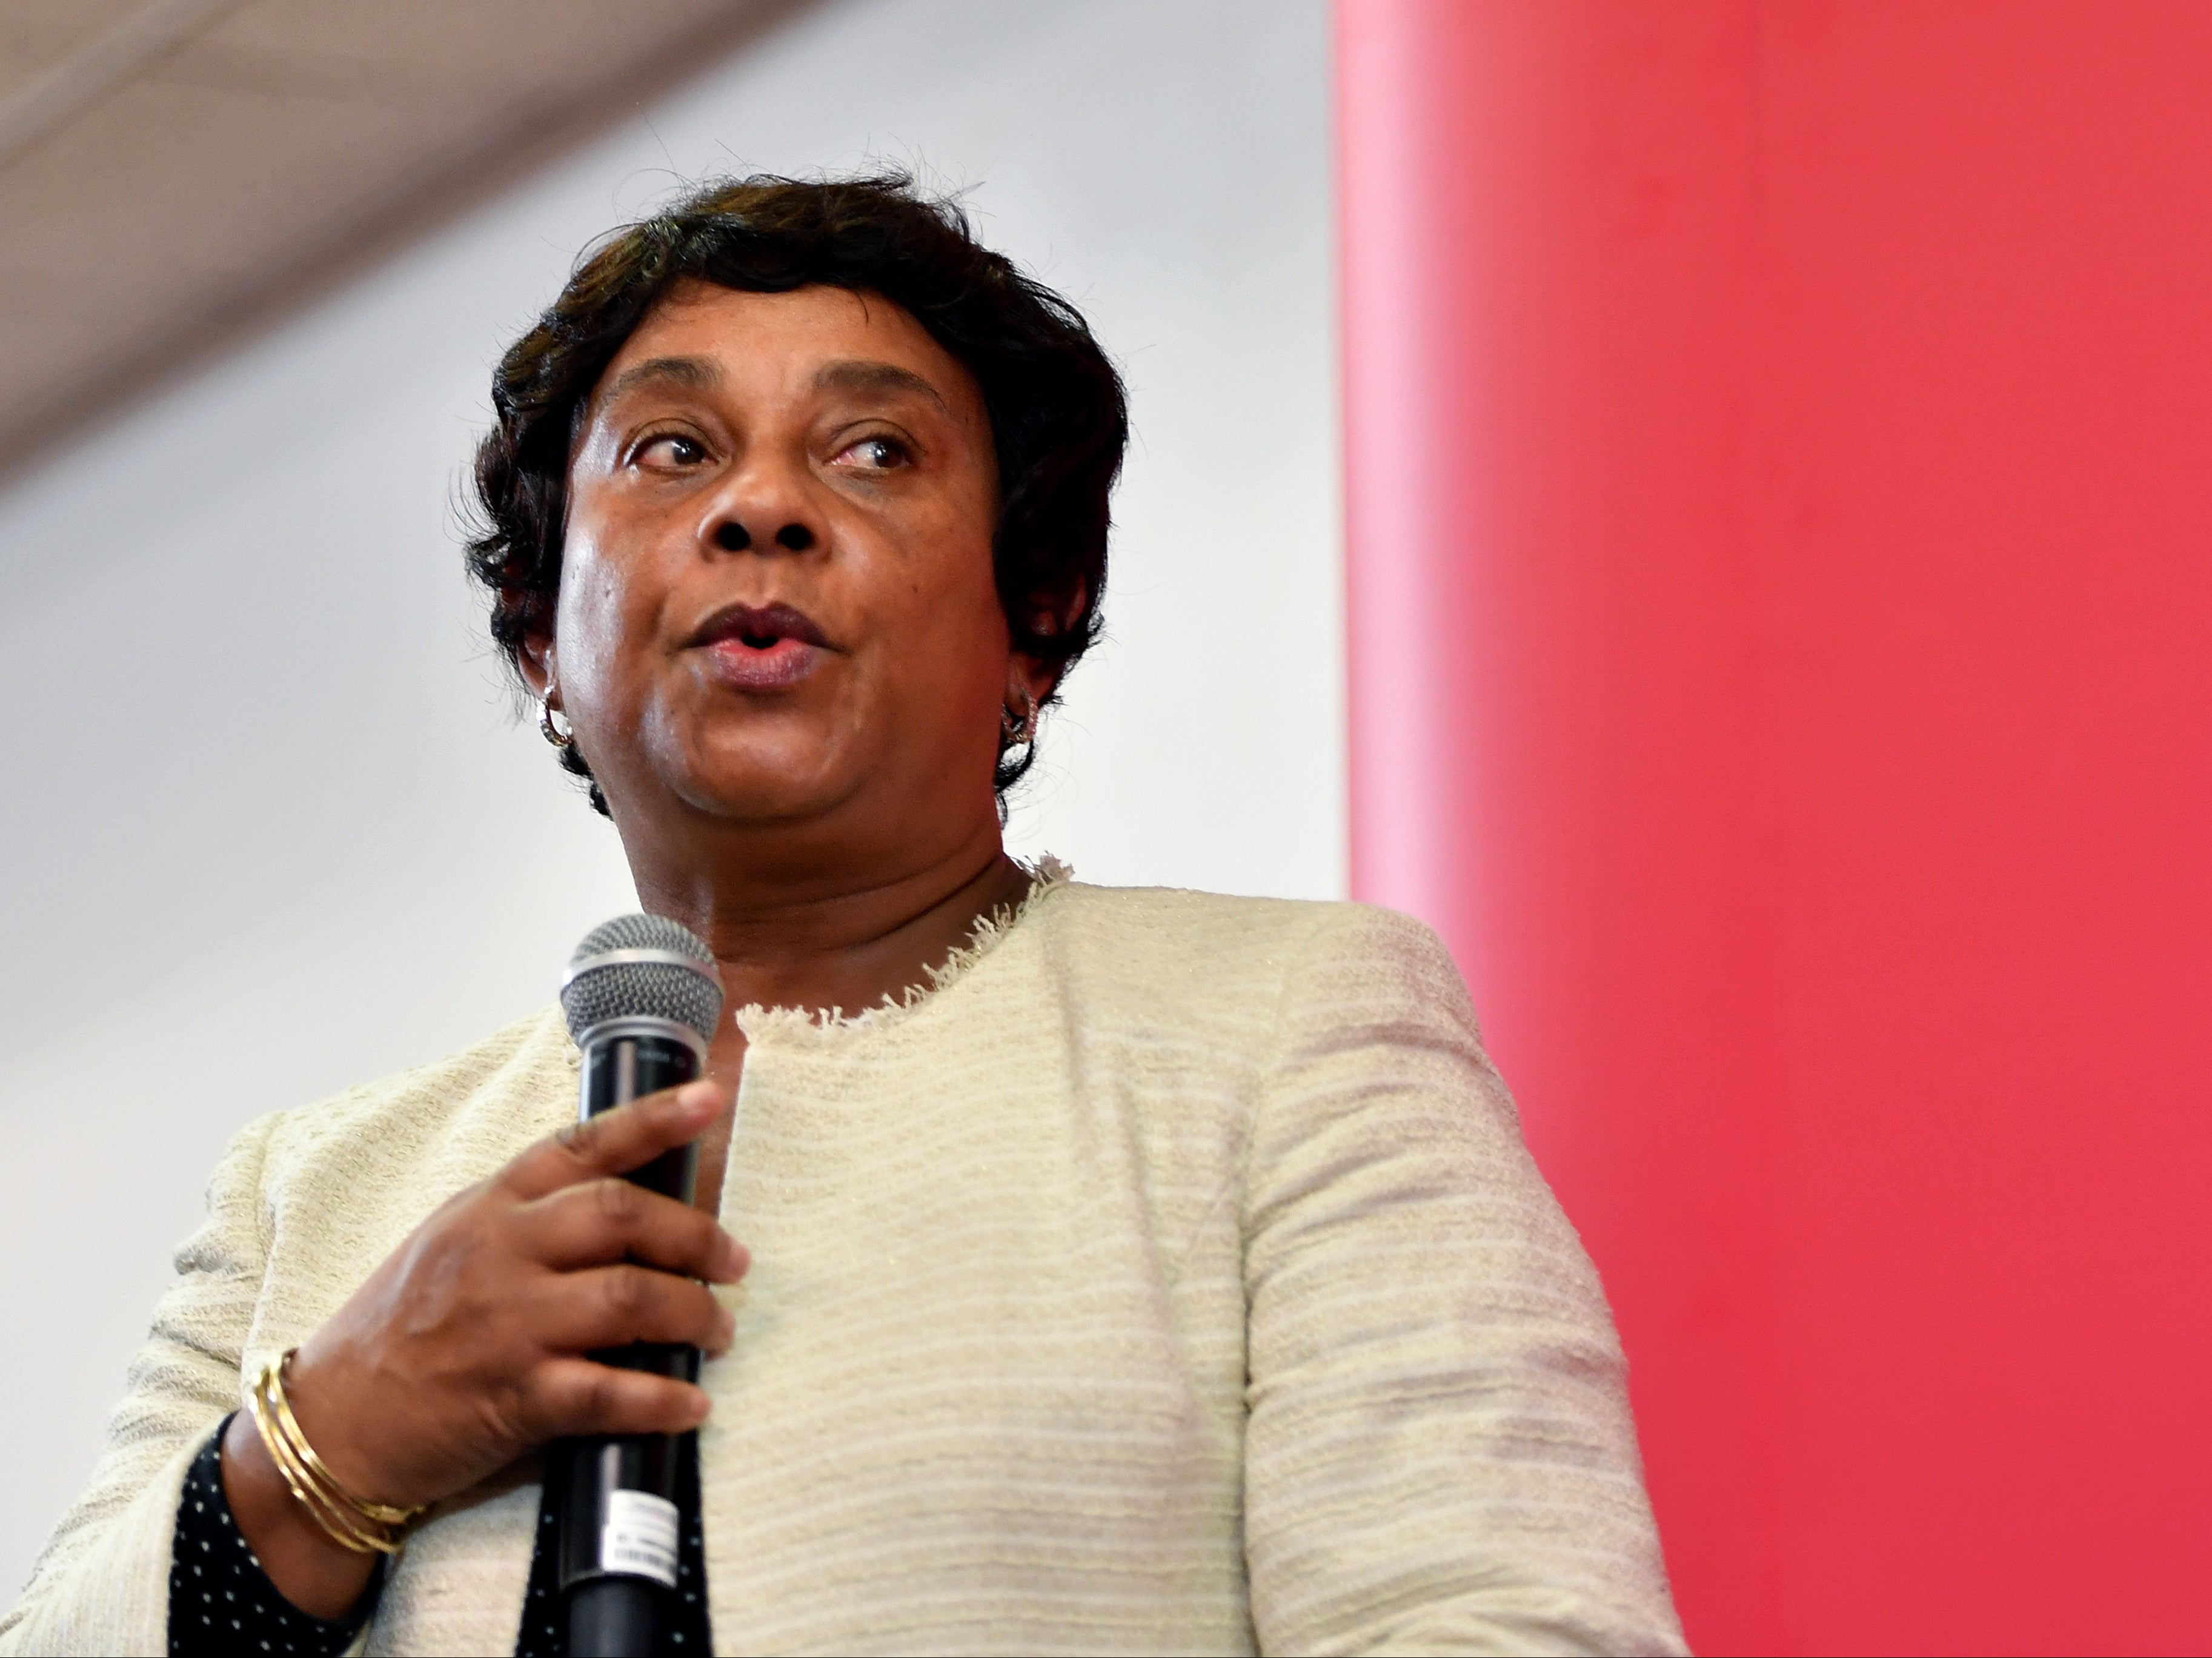 Doreen Lawrence has given recommendations for the government to protect more communities from Covid-19